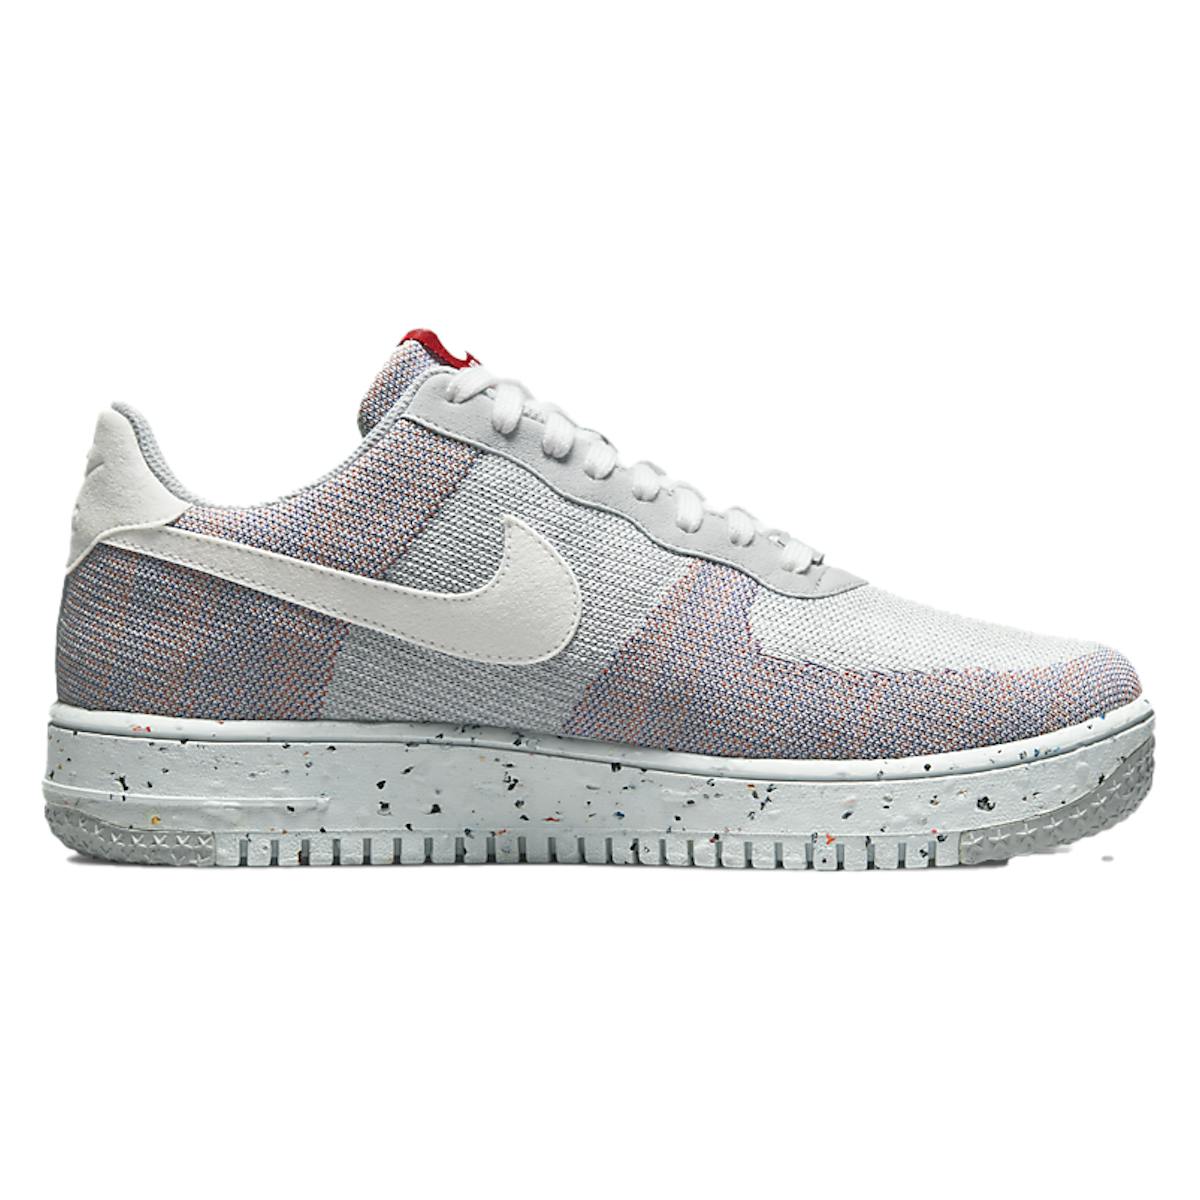 Nike Air Force 1 Crater Flyknit "Wolf Grey"